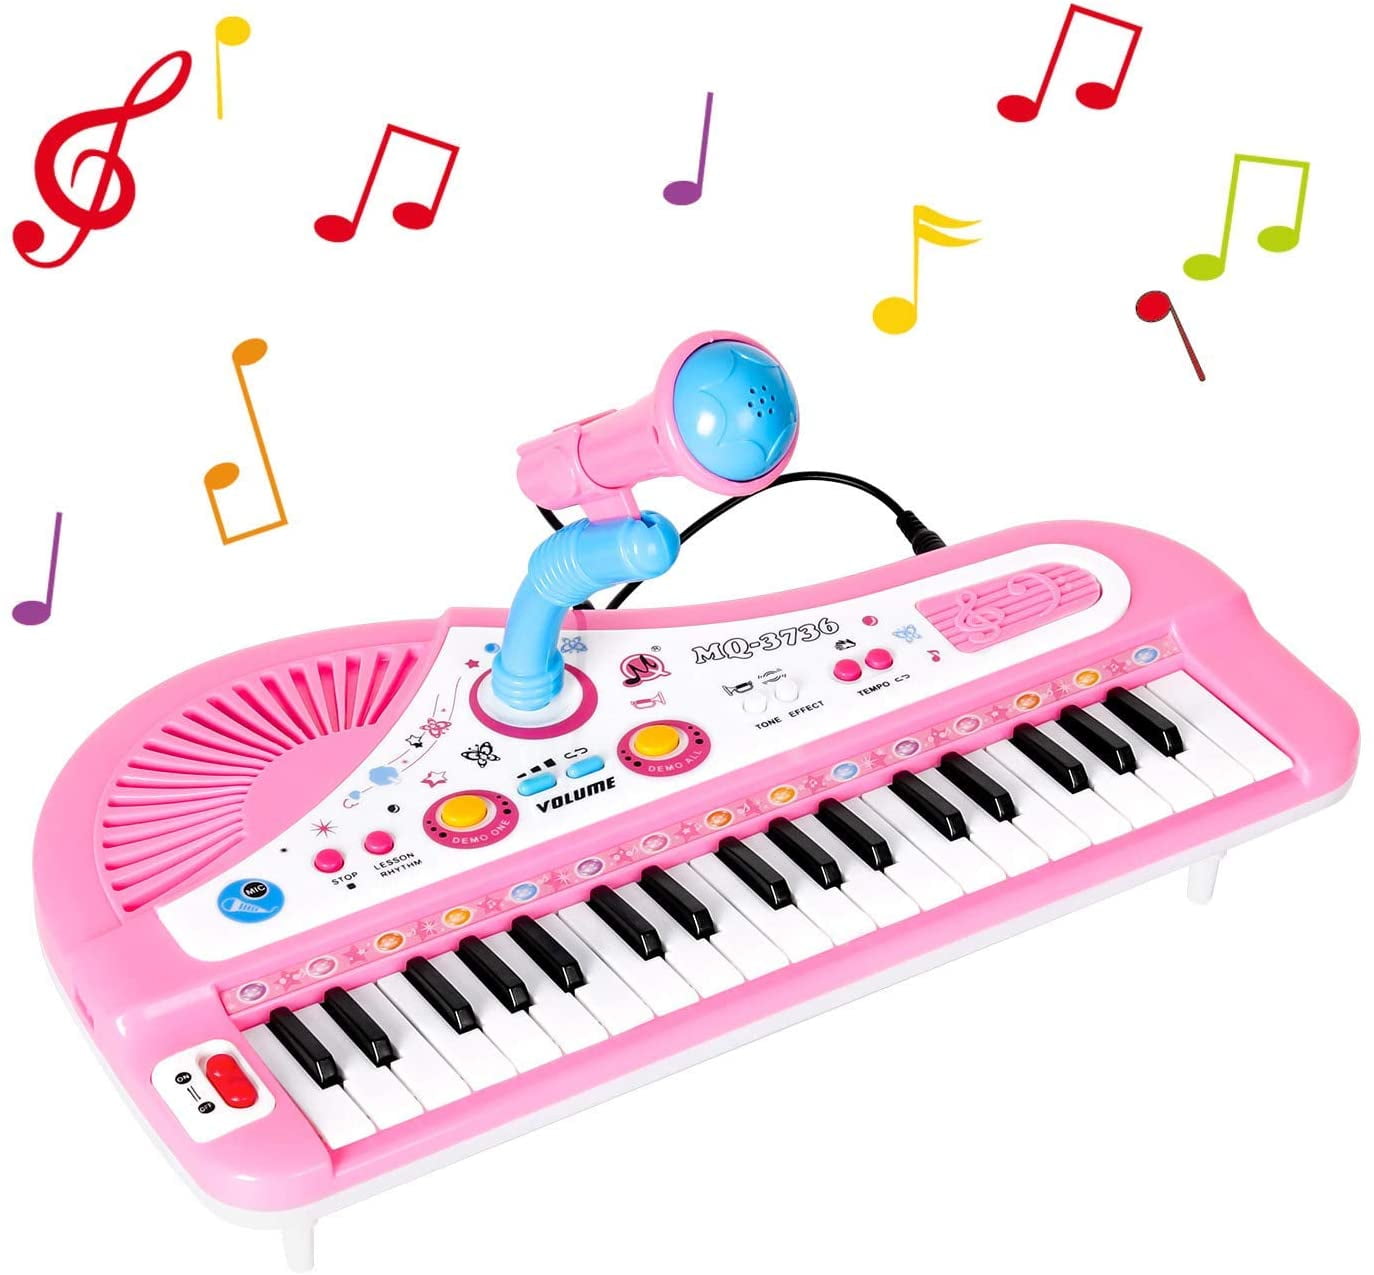 37-Keys Upgrade Color Electronic Kids Piano with 4 Animals Sound Portable Music Keyboard Educational Musical Piano Ideal Xmas Gifts for 3-8 Years Old Boys Girls Beginner Piano Keyboard Shine Pink